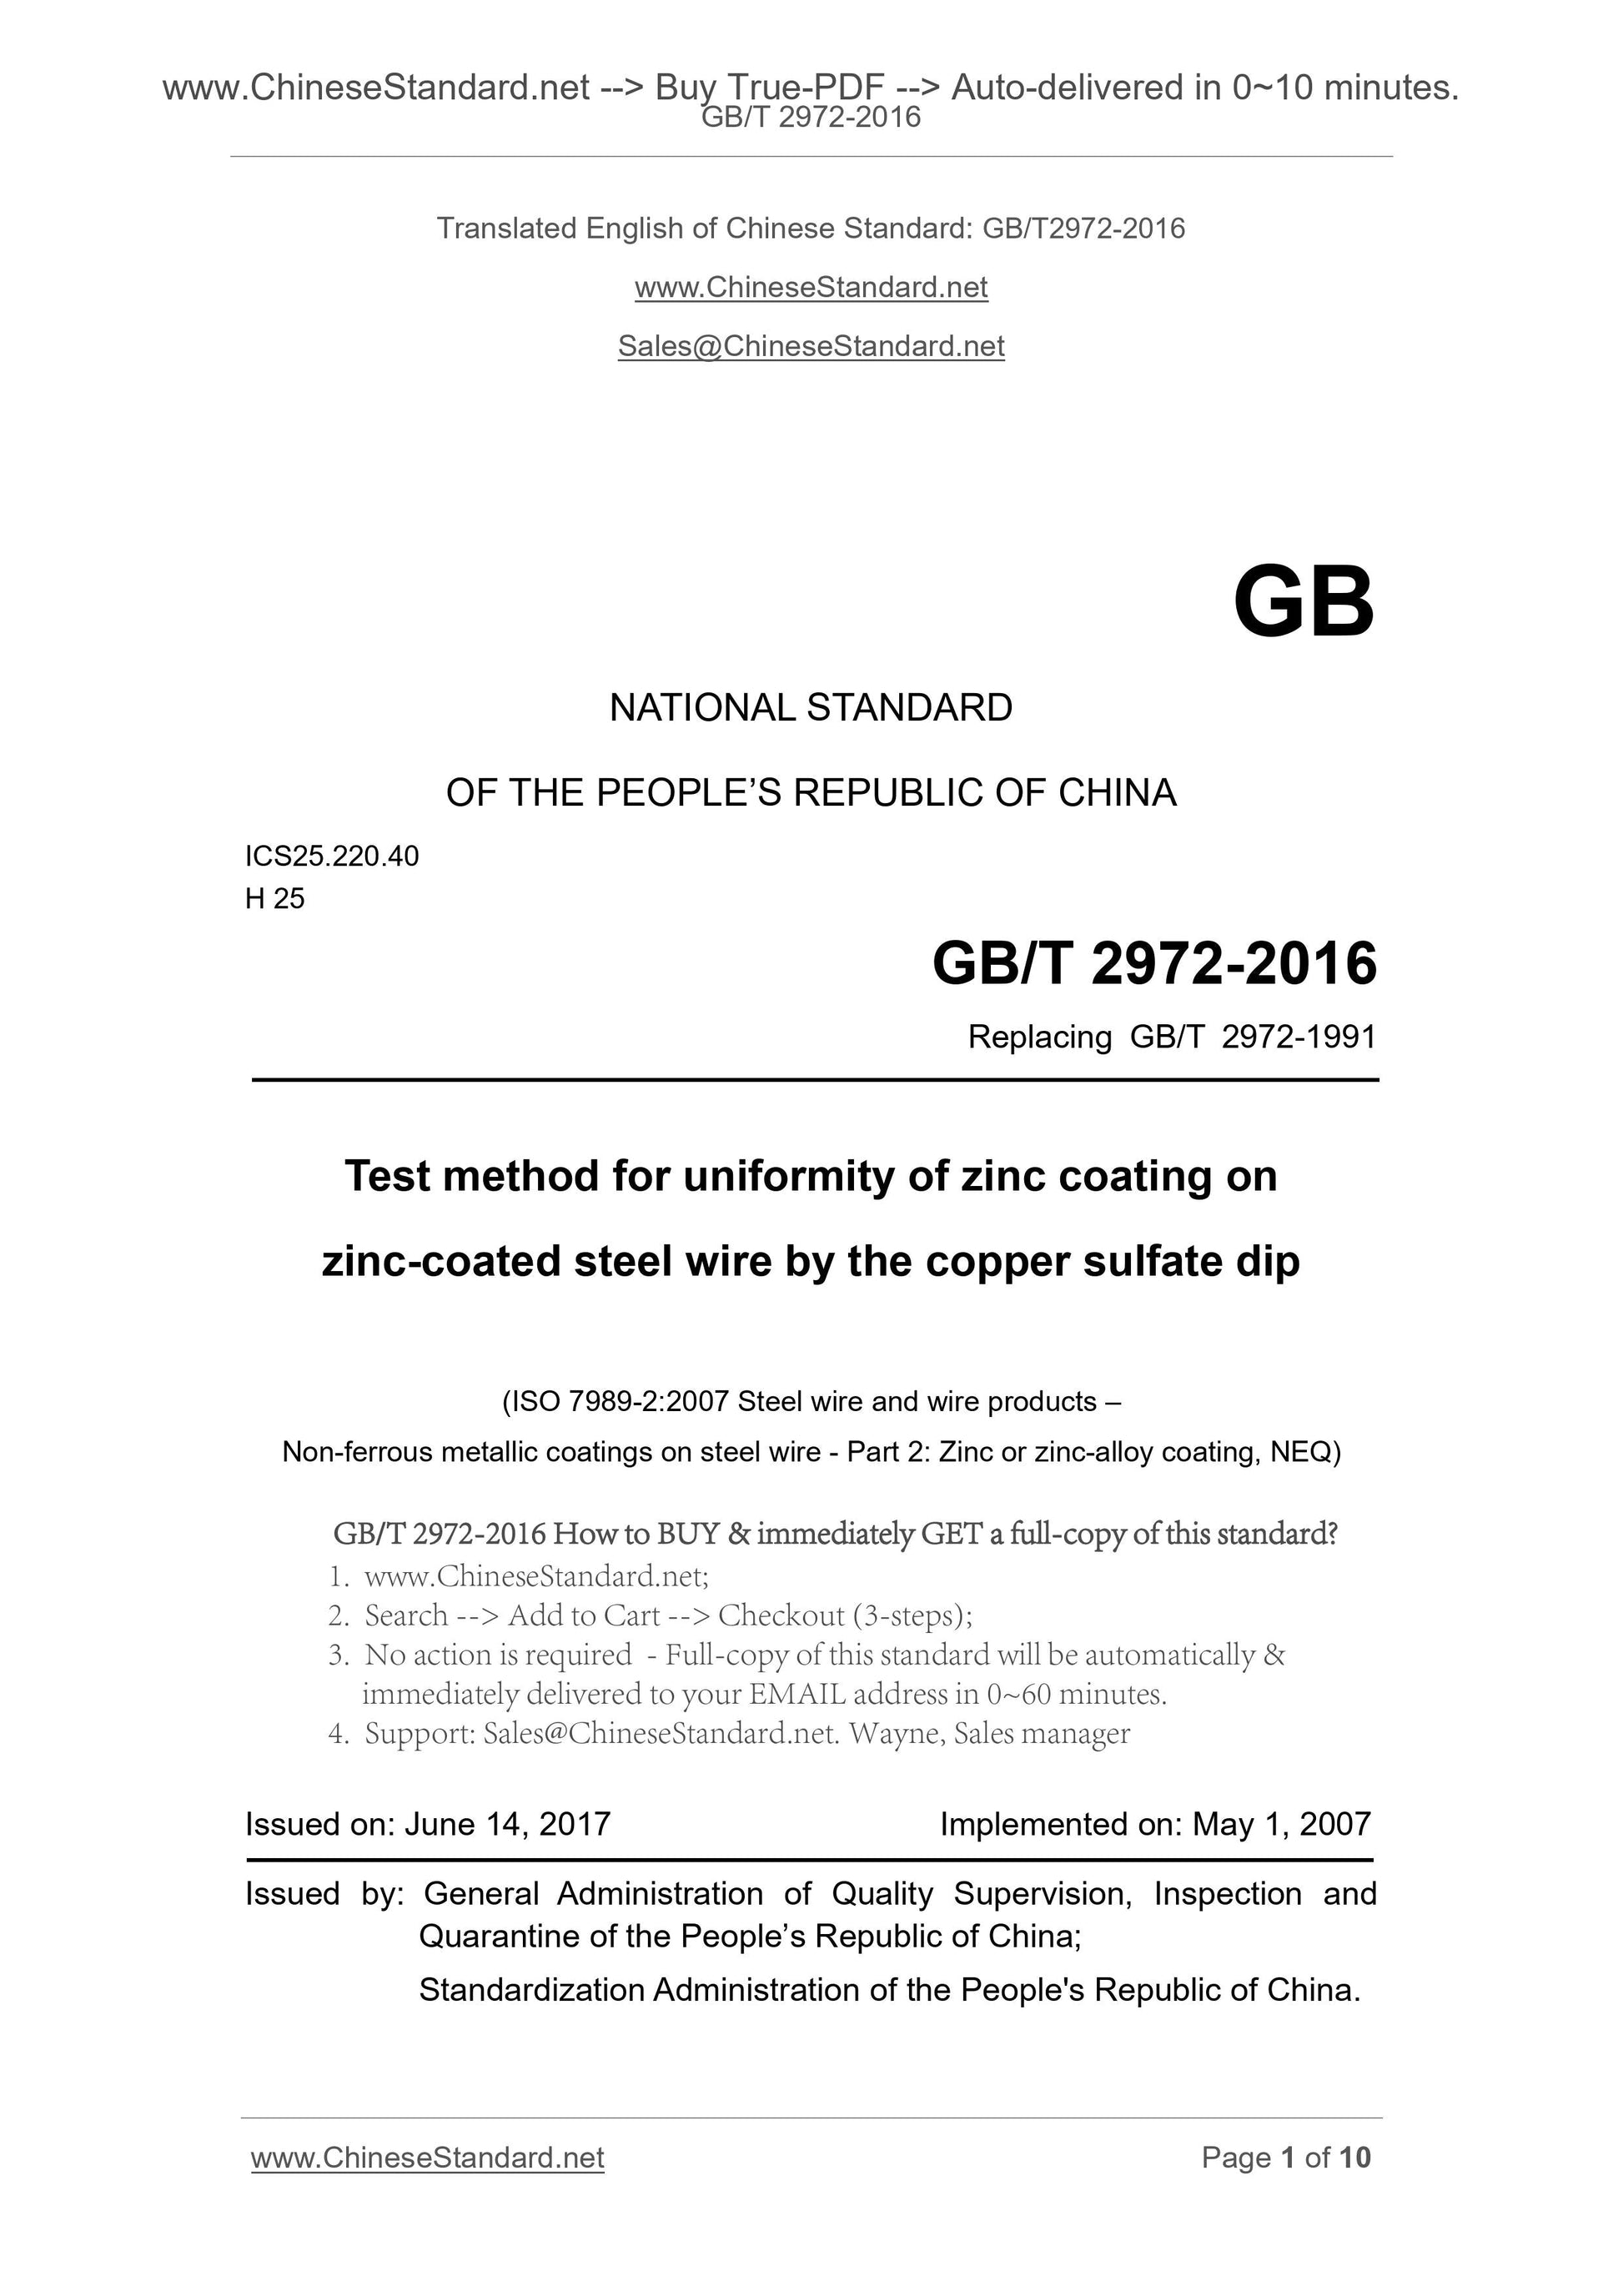 GB/T 2972-2016 Page 1